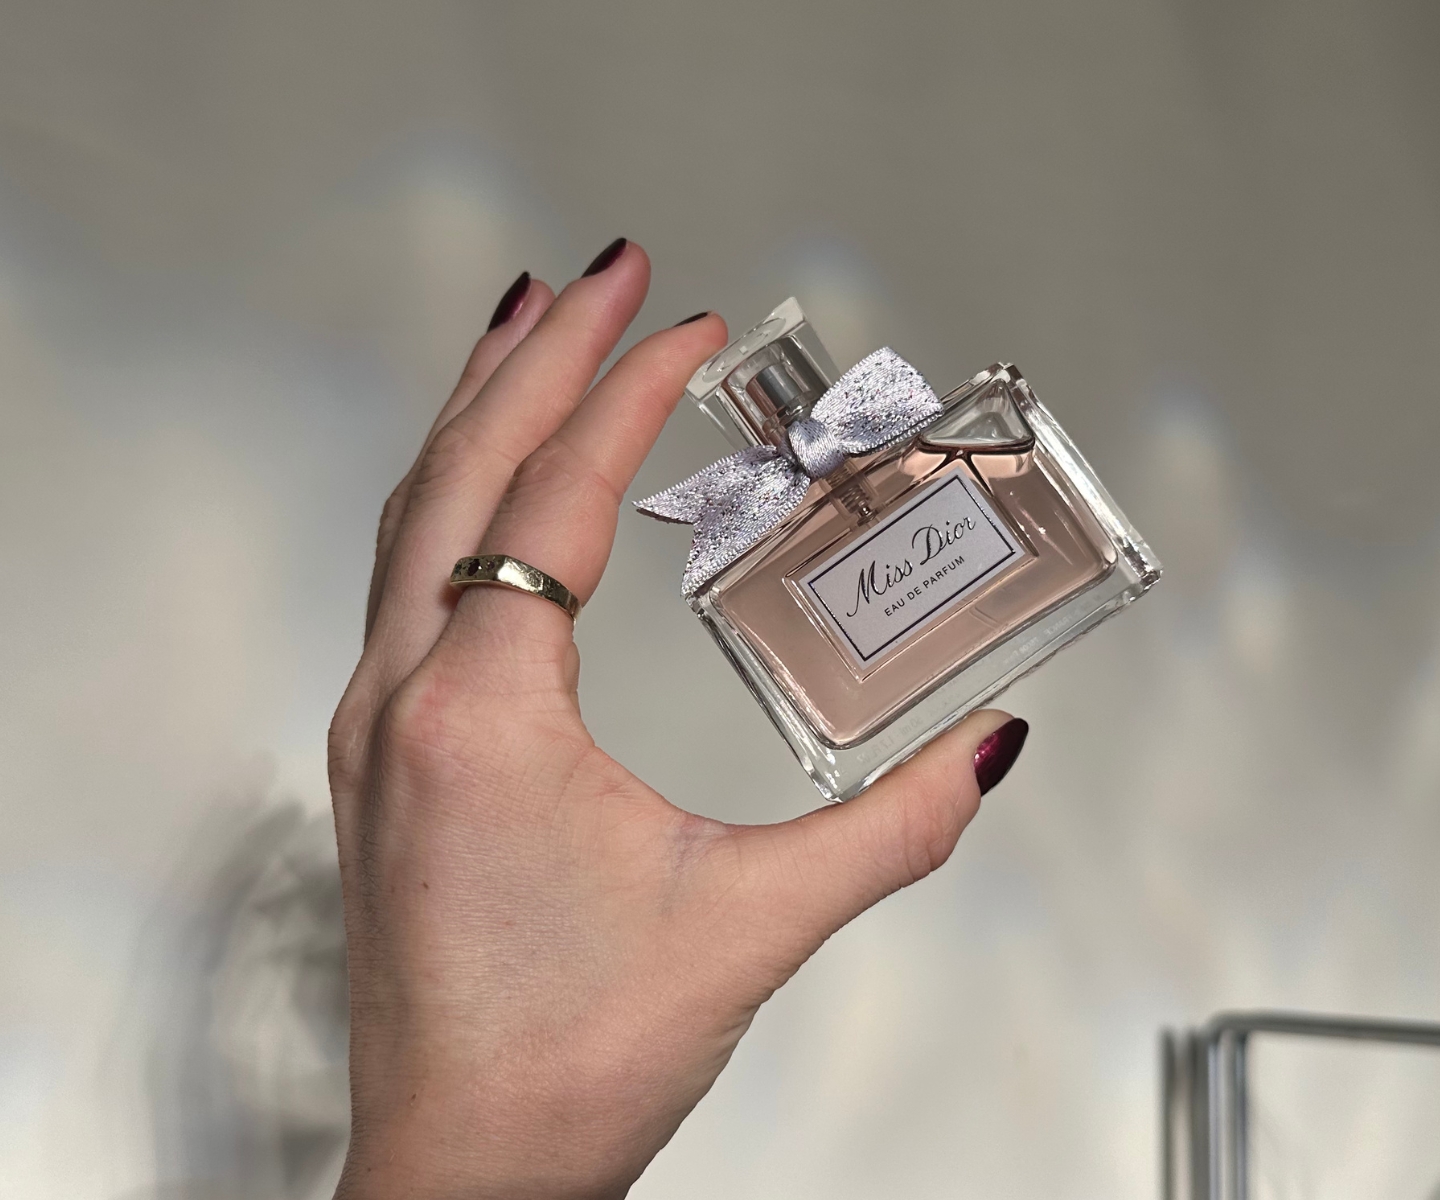 DIOR Miss Dior EDP in-article